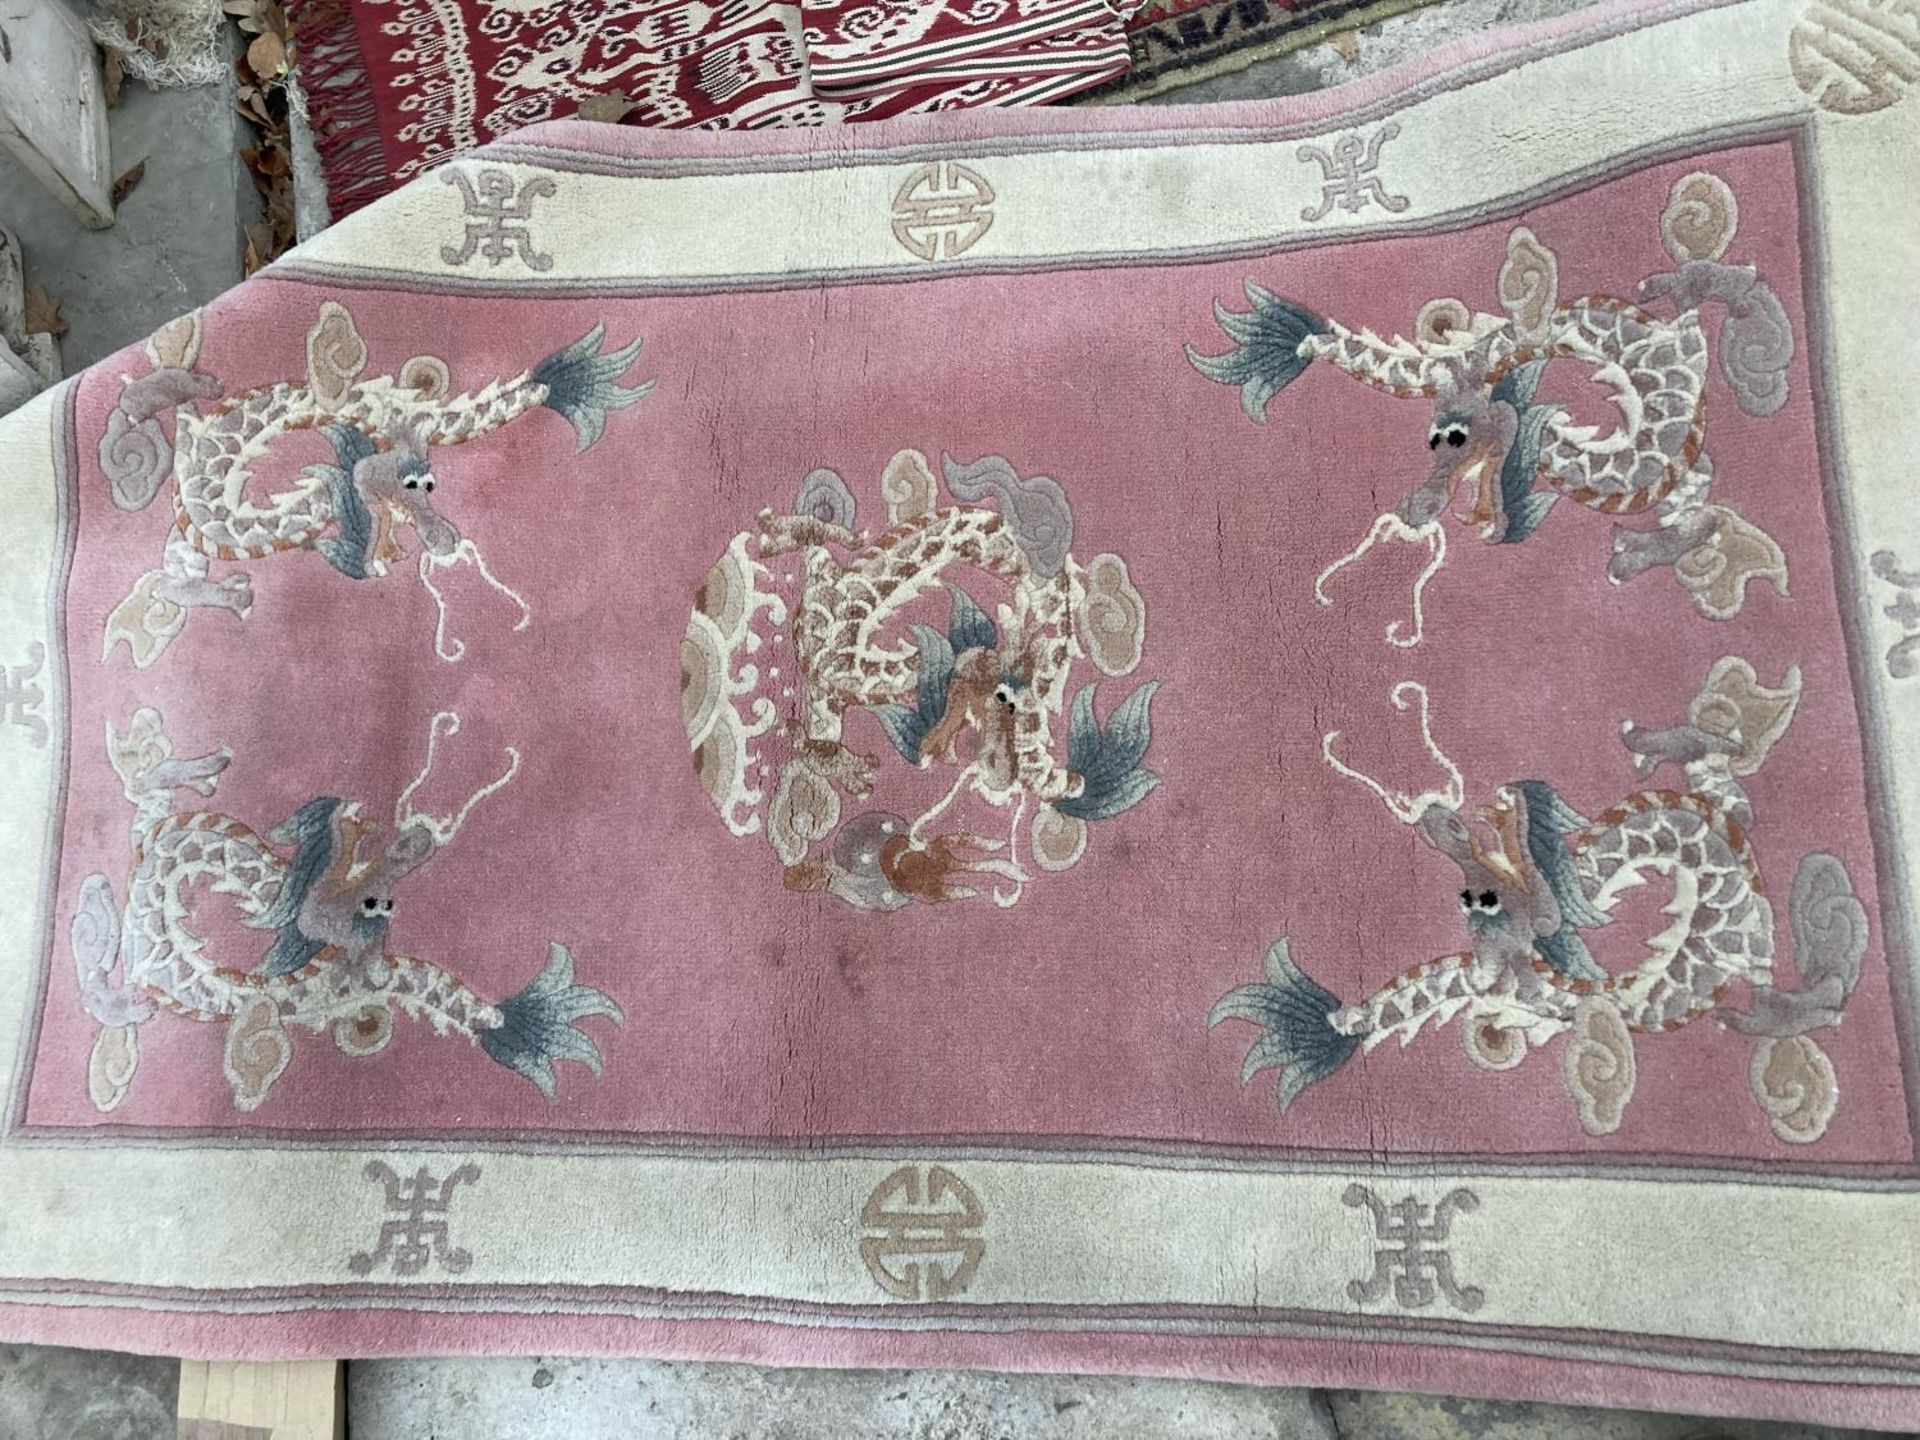 A PINK PATTERNED FRINGED RUG AND A SMALL RED PATTERNED RUG - Image 2 of 2